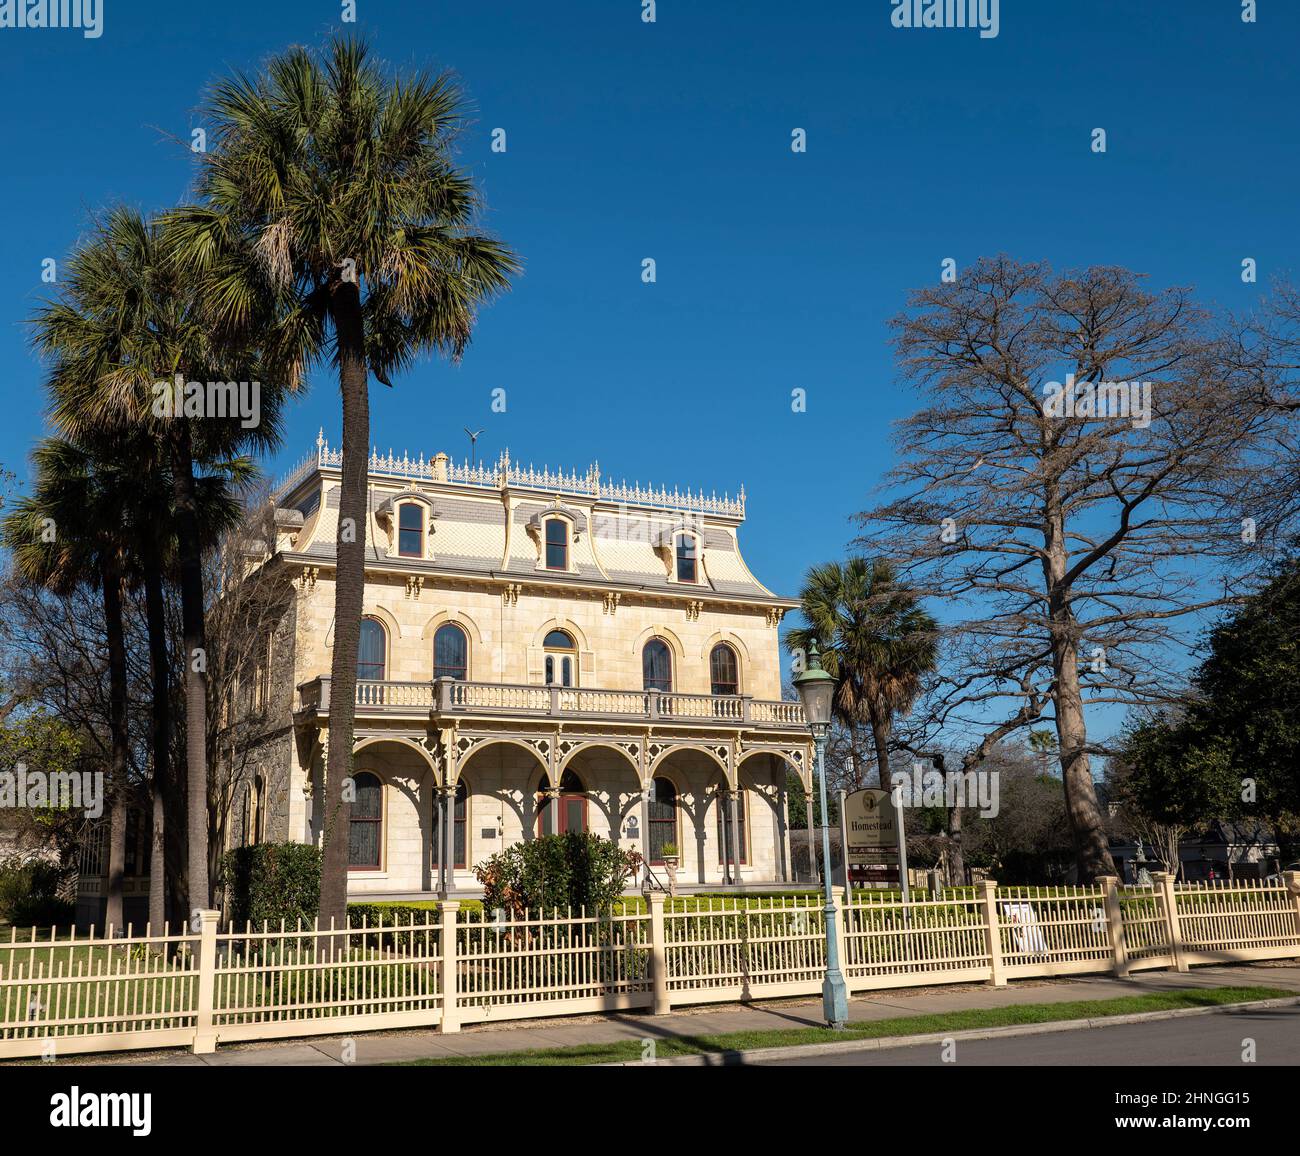 SAN ANTONIO, TX - 24 JAN 2020: Beautiful old limestone house in the King William Hisoric District on a sunny day, the Edward Steves Homestead museum i Stock Photo